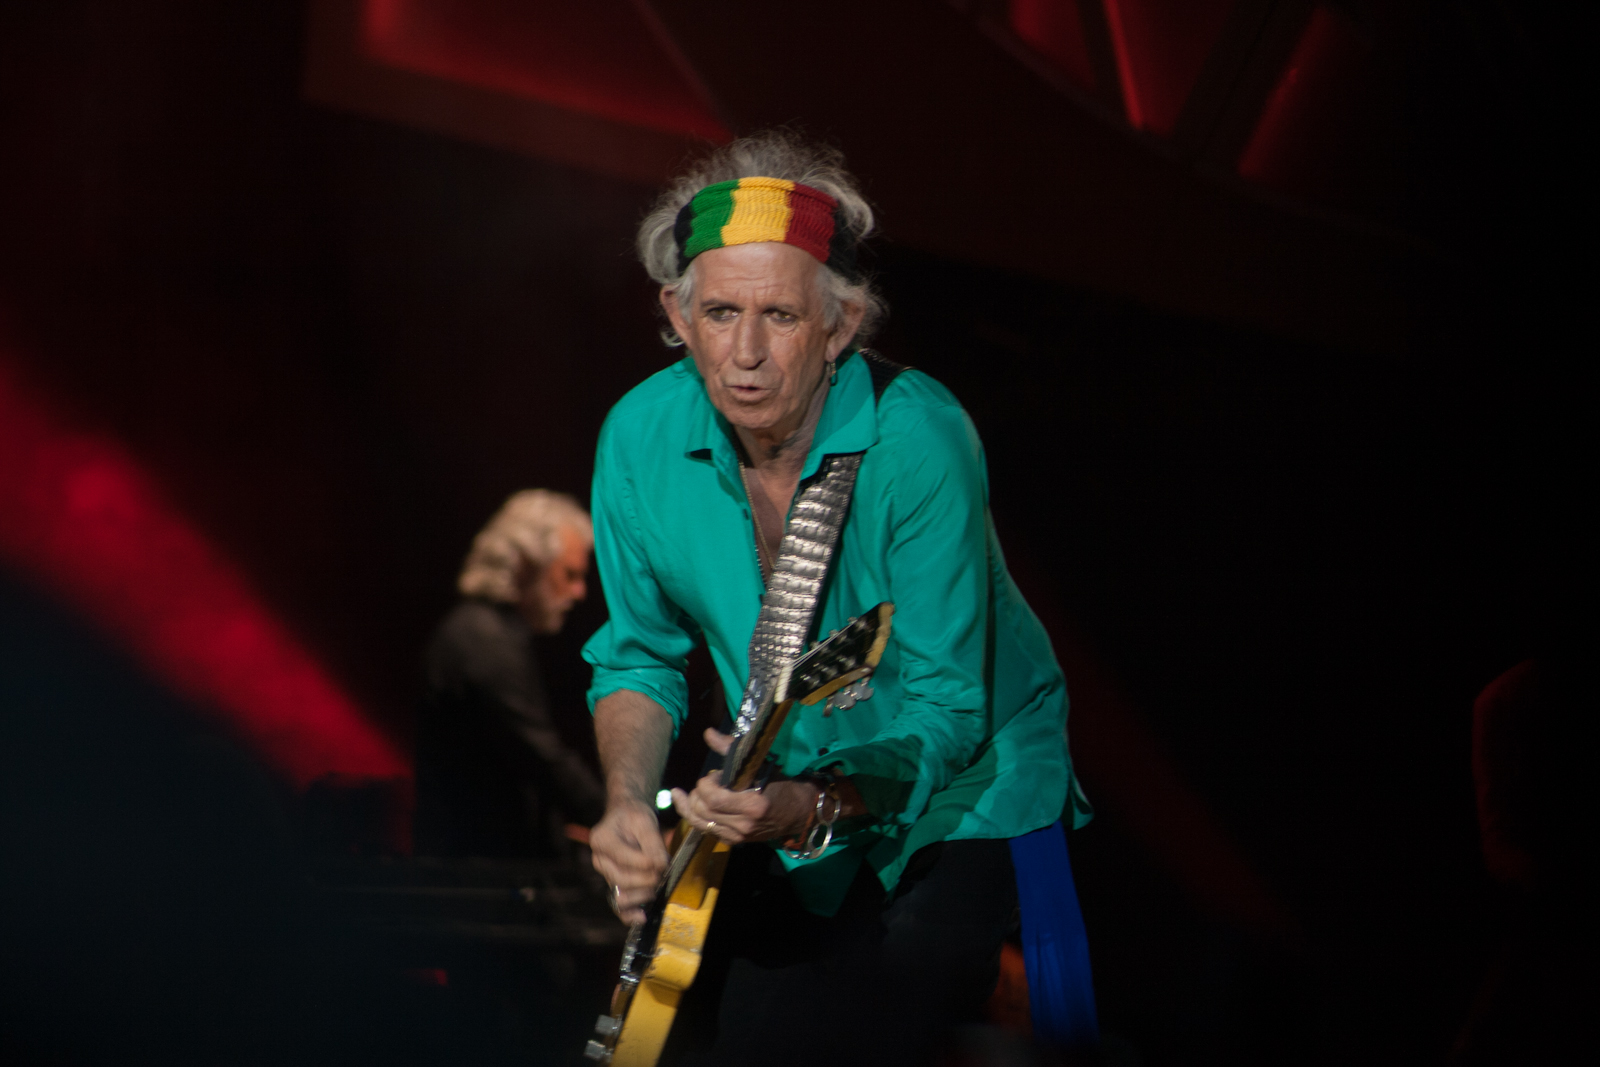 Hear Demos of Keith Richards Singing Lead Vocals on Rolling Stones Classics: “Gimme Shelter,” “Wild Horses” & More